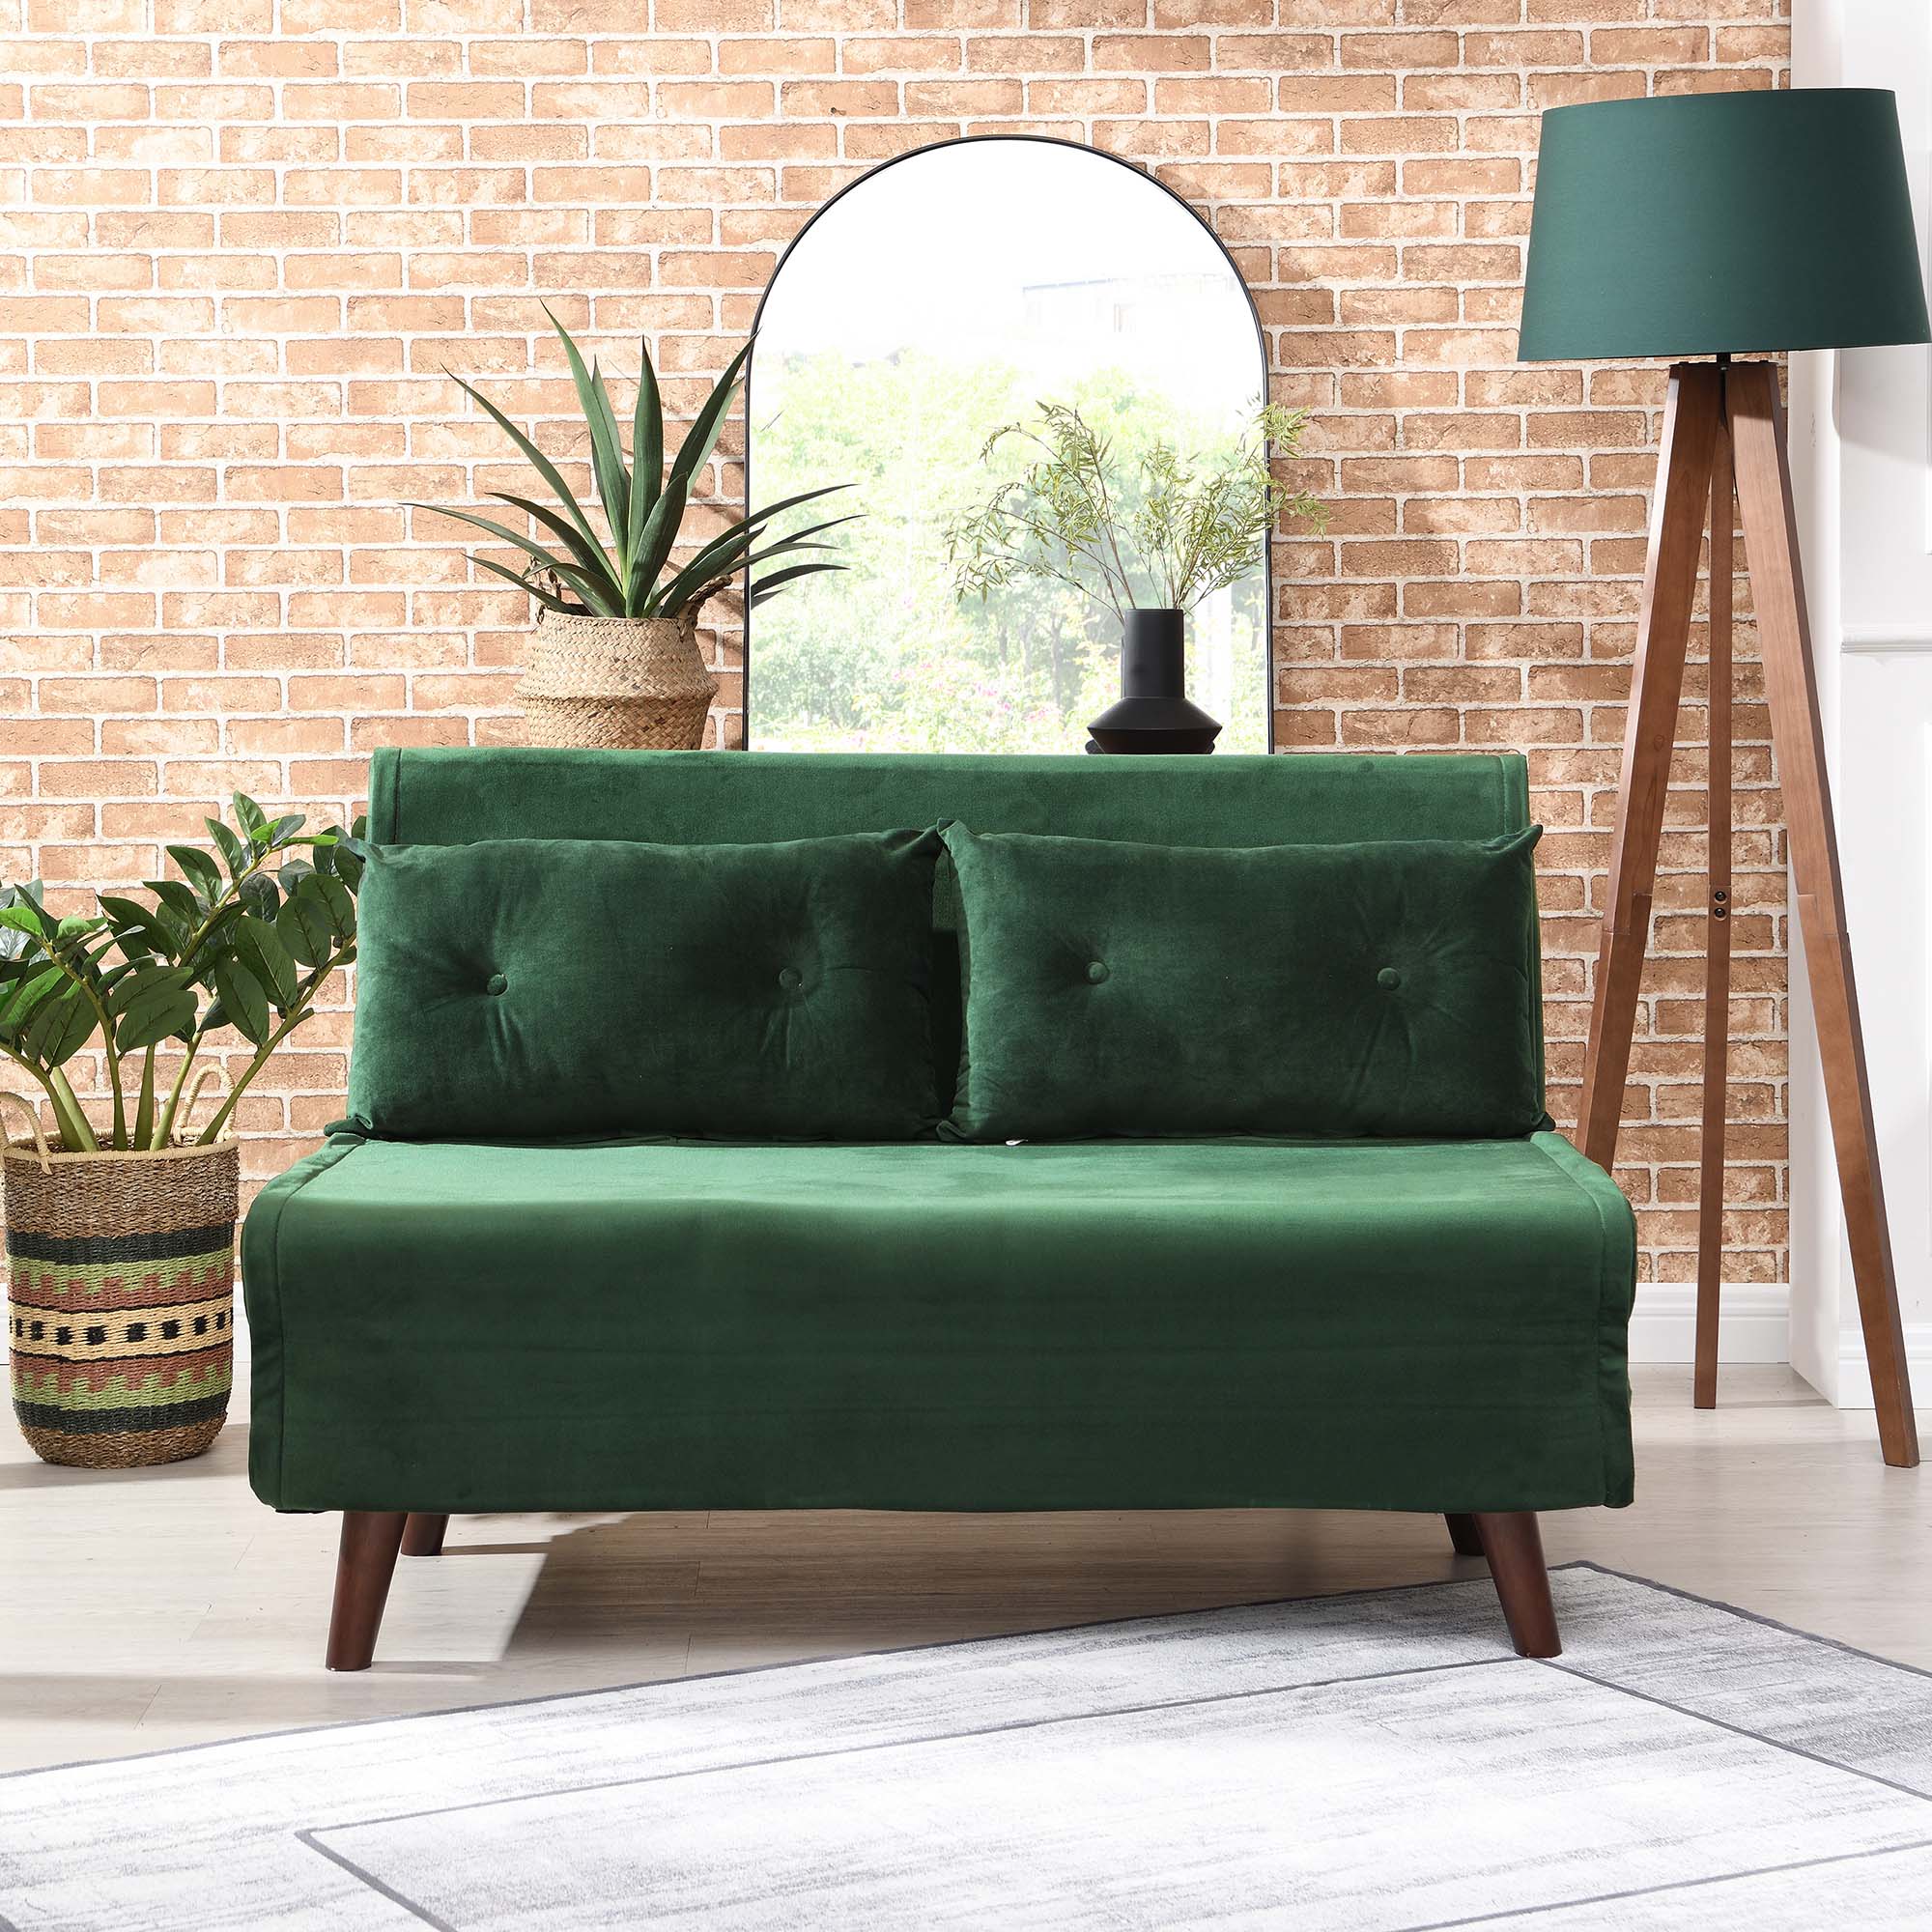 ALGO 2-Seater Small Double Folding Sofa Bed with Cushion Pine Green Velvet